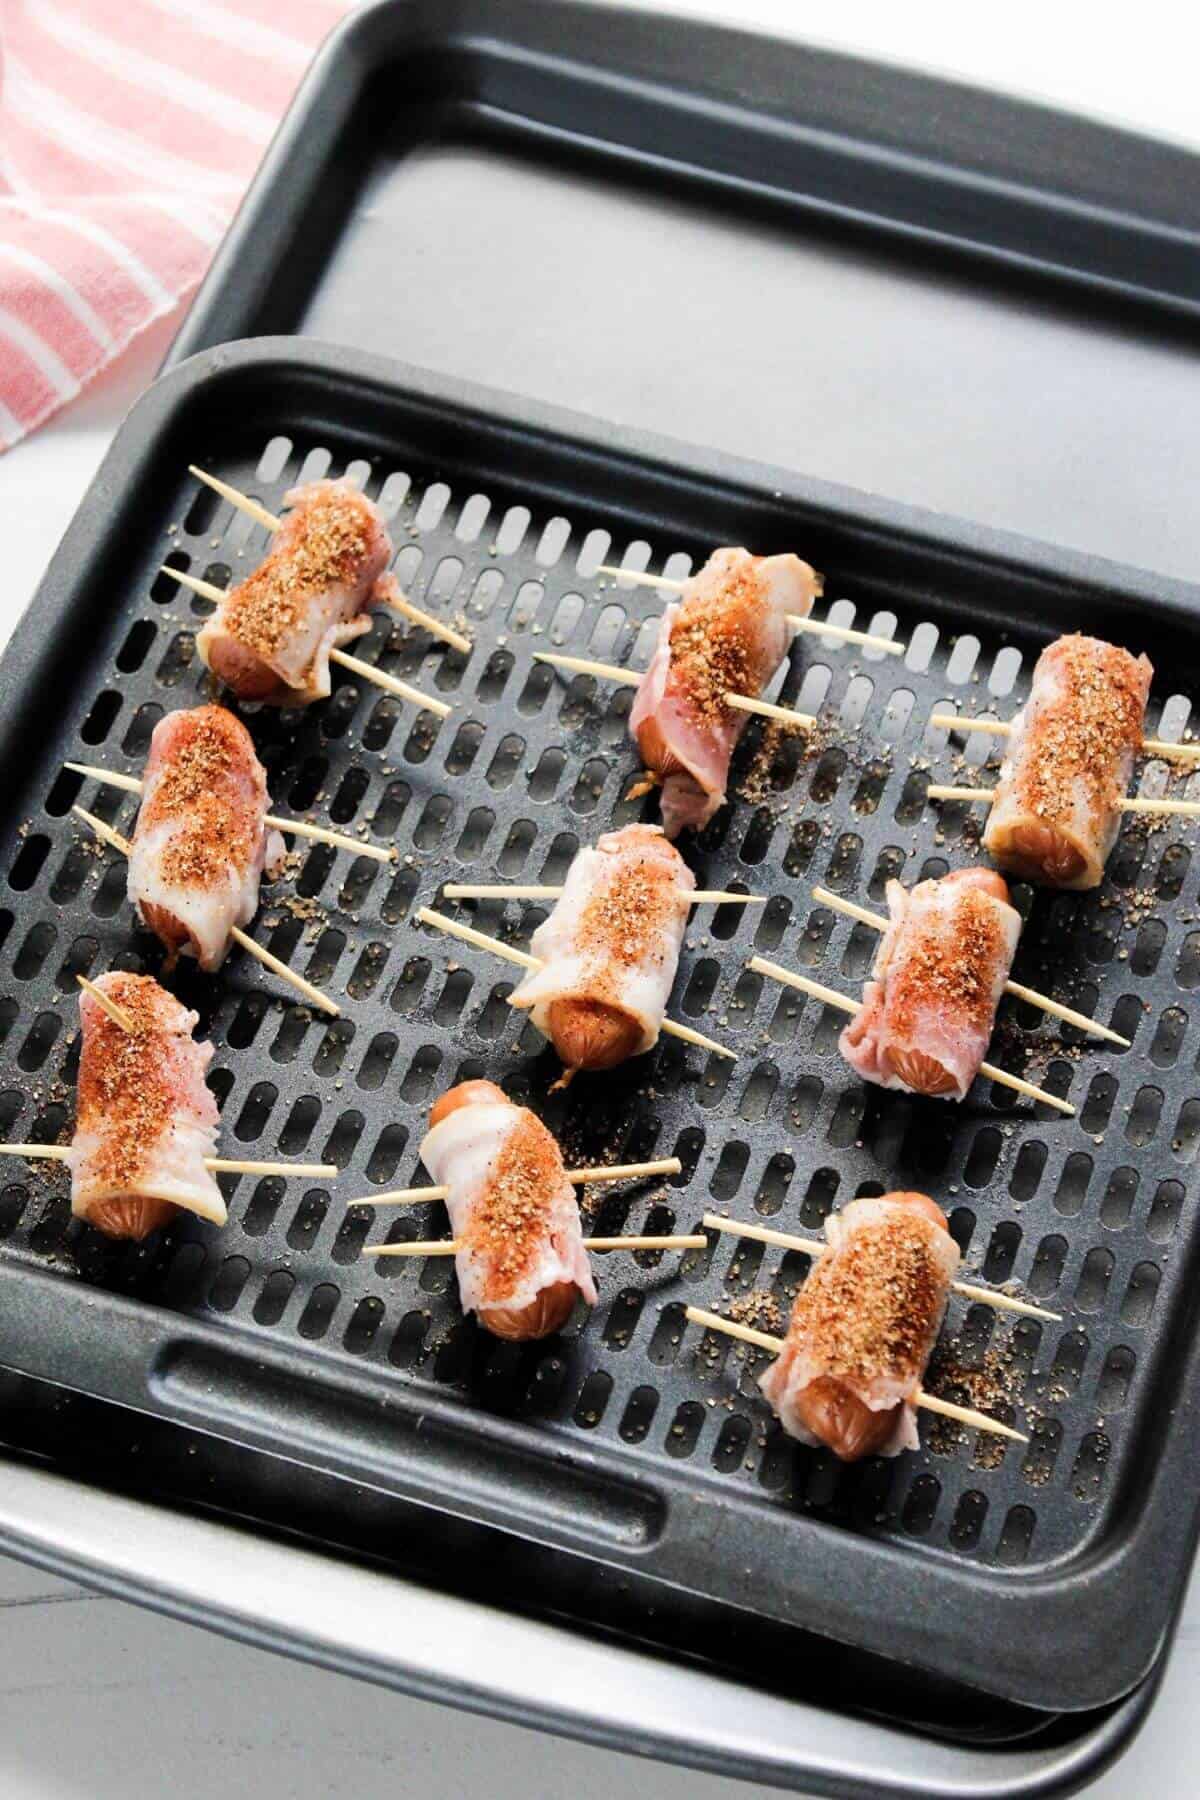 Bacon wrapped smokies on air fryer tray with seasoning sprinkled on.